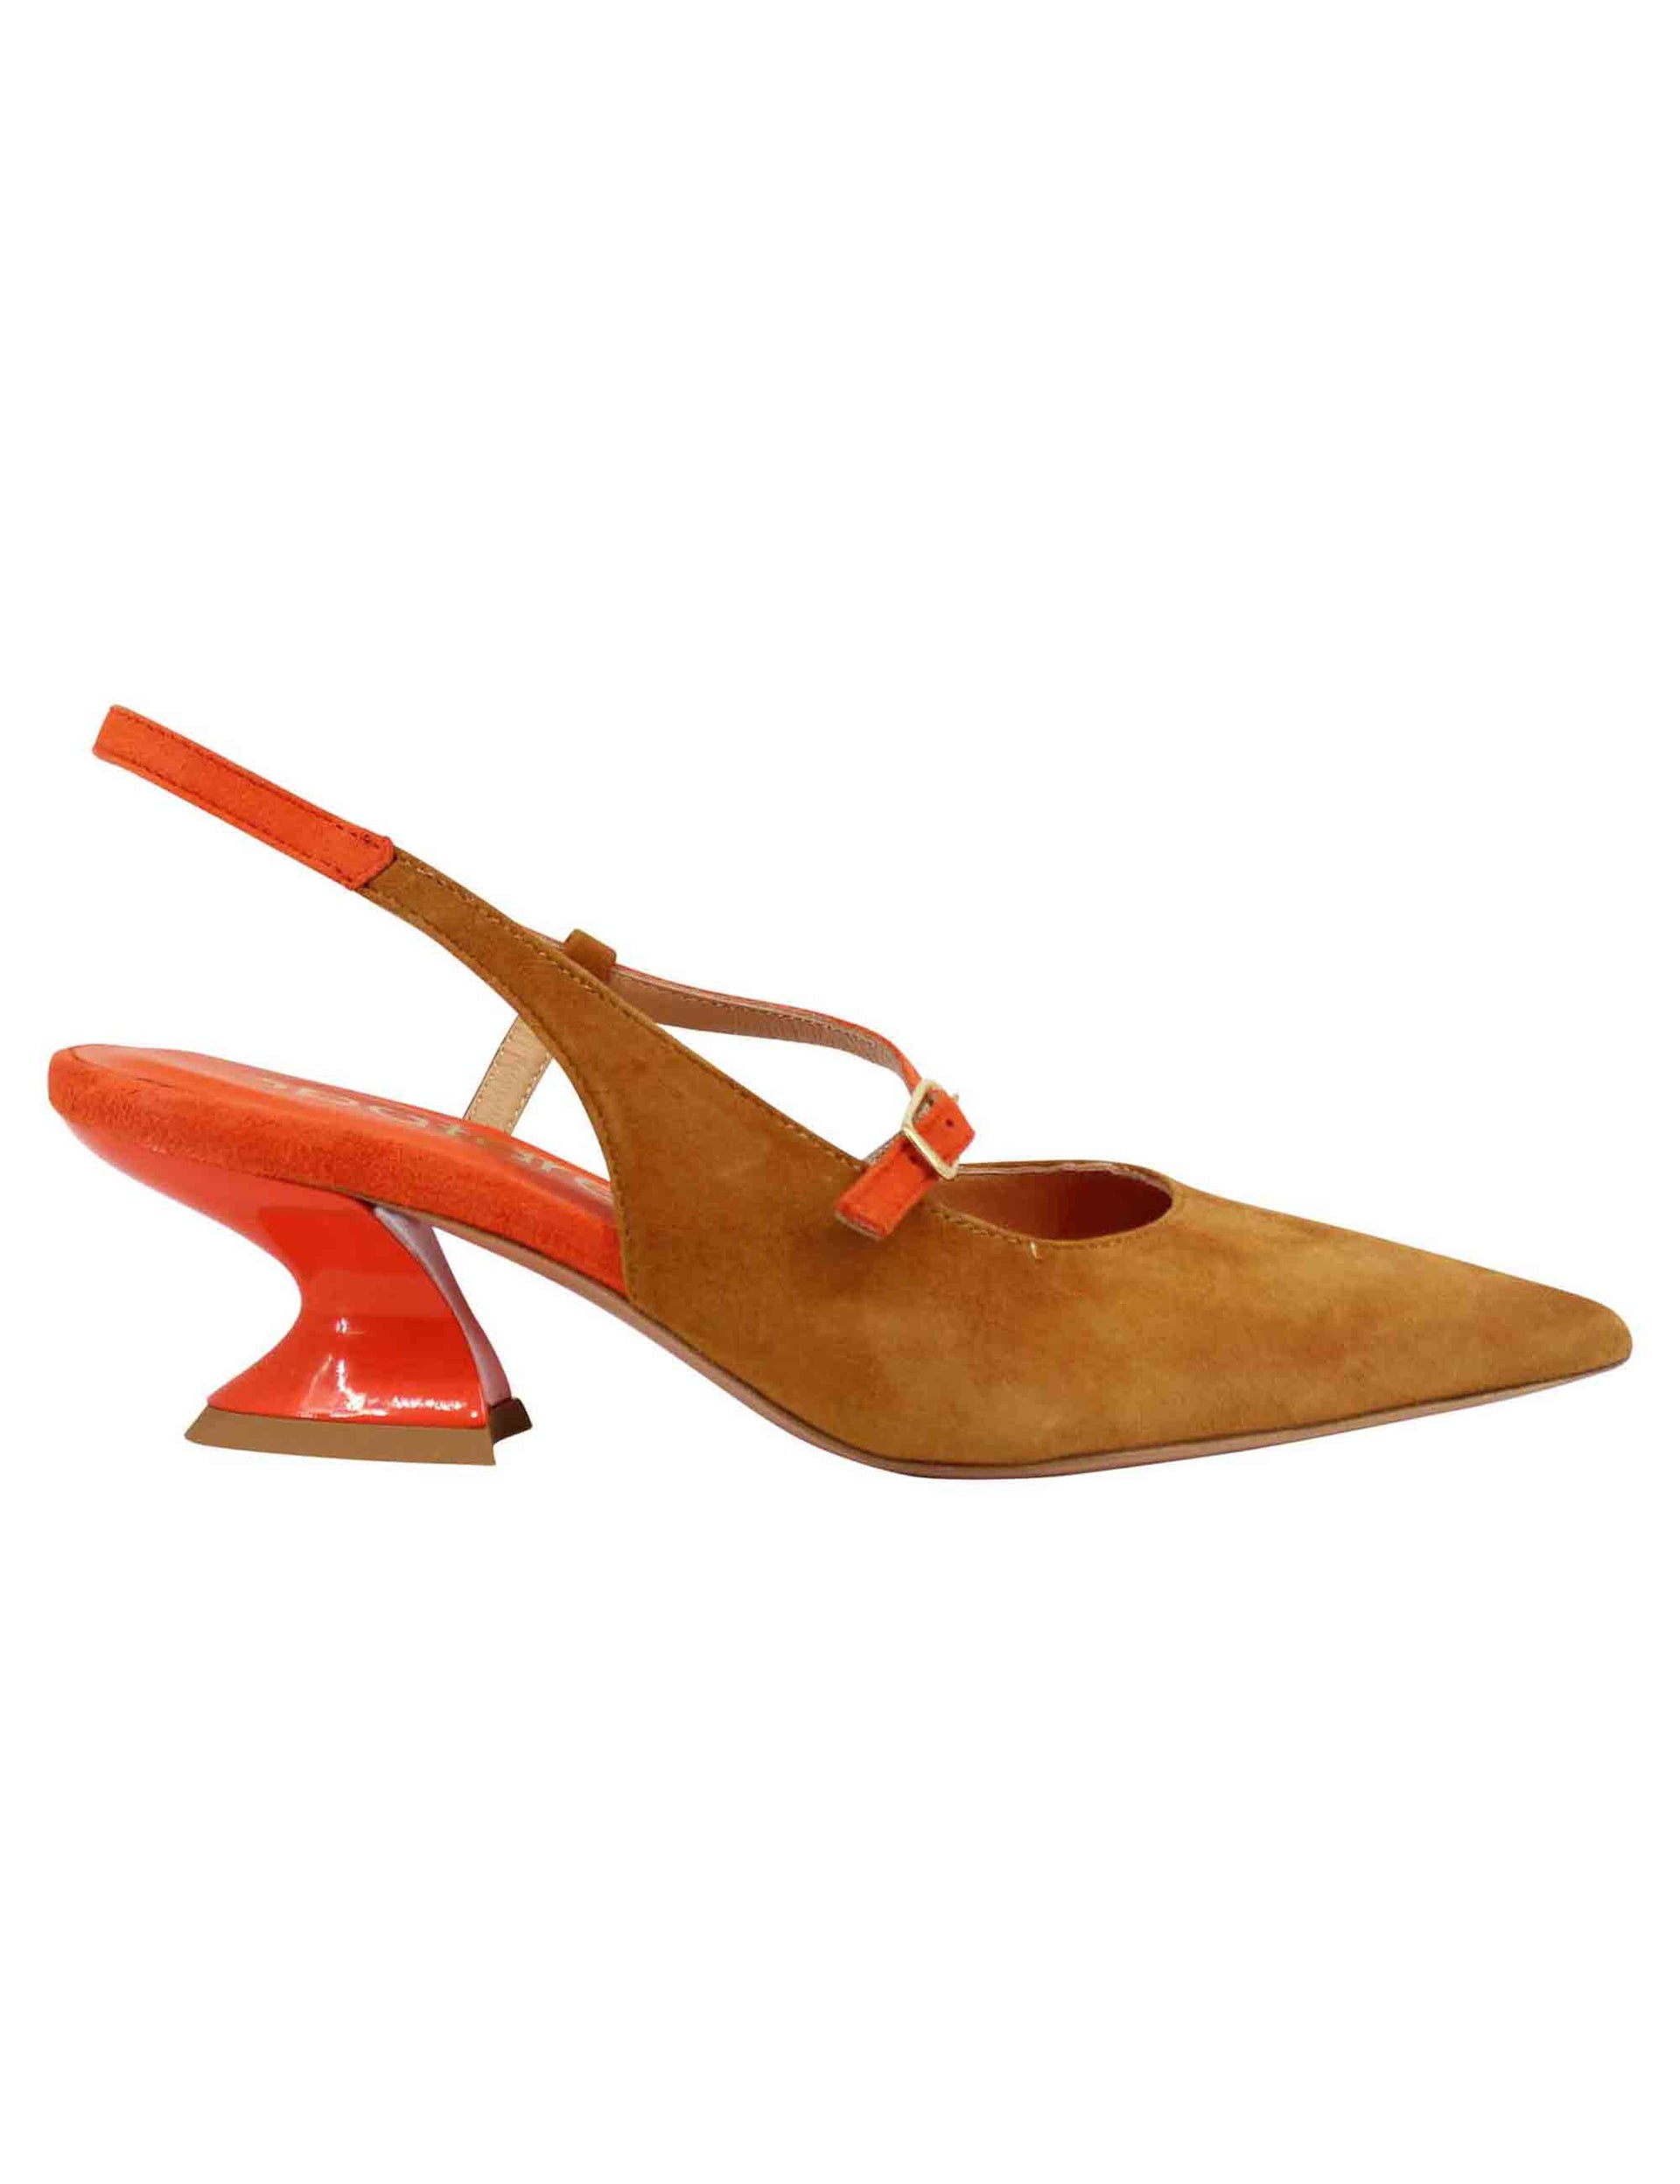 Women's slingback pumps in leather suede with contrasting heel